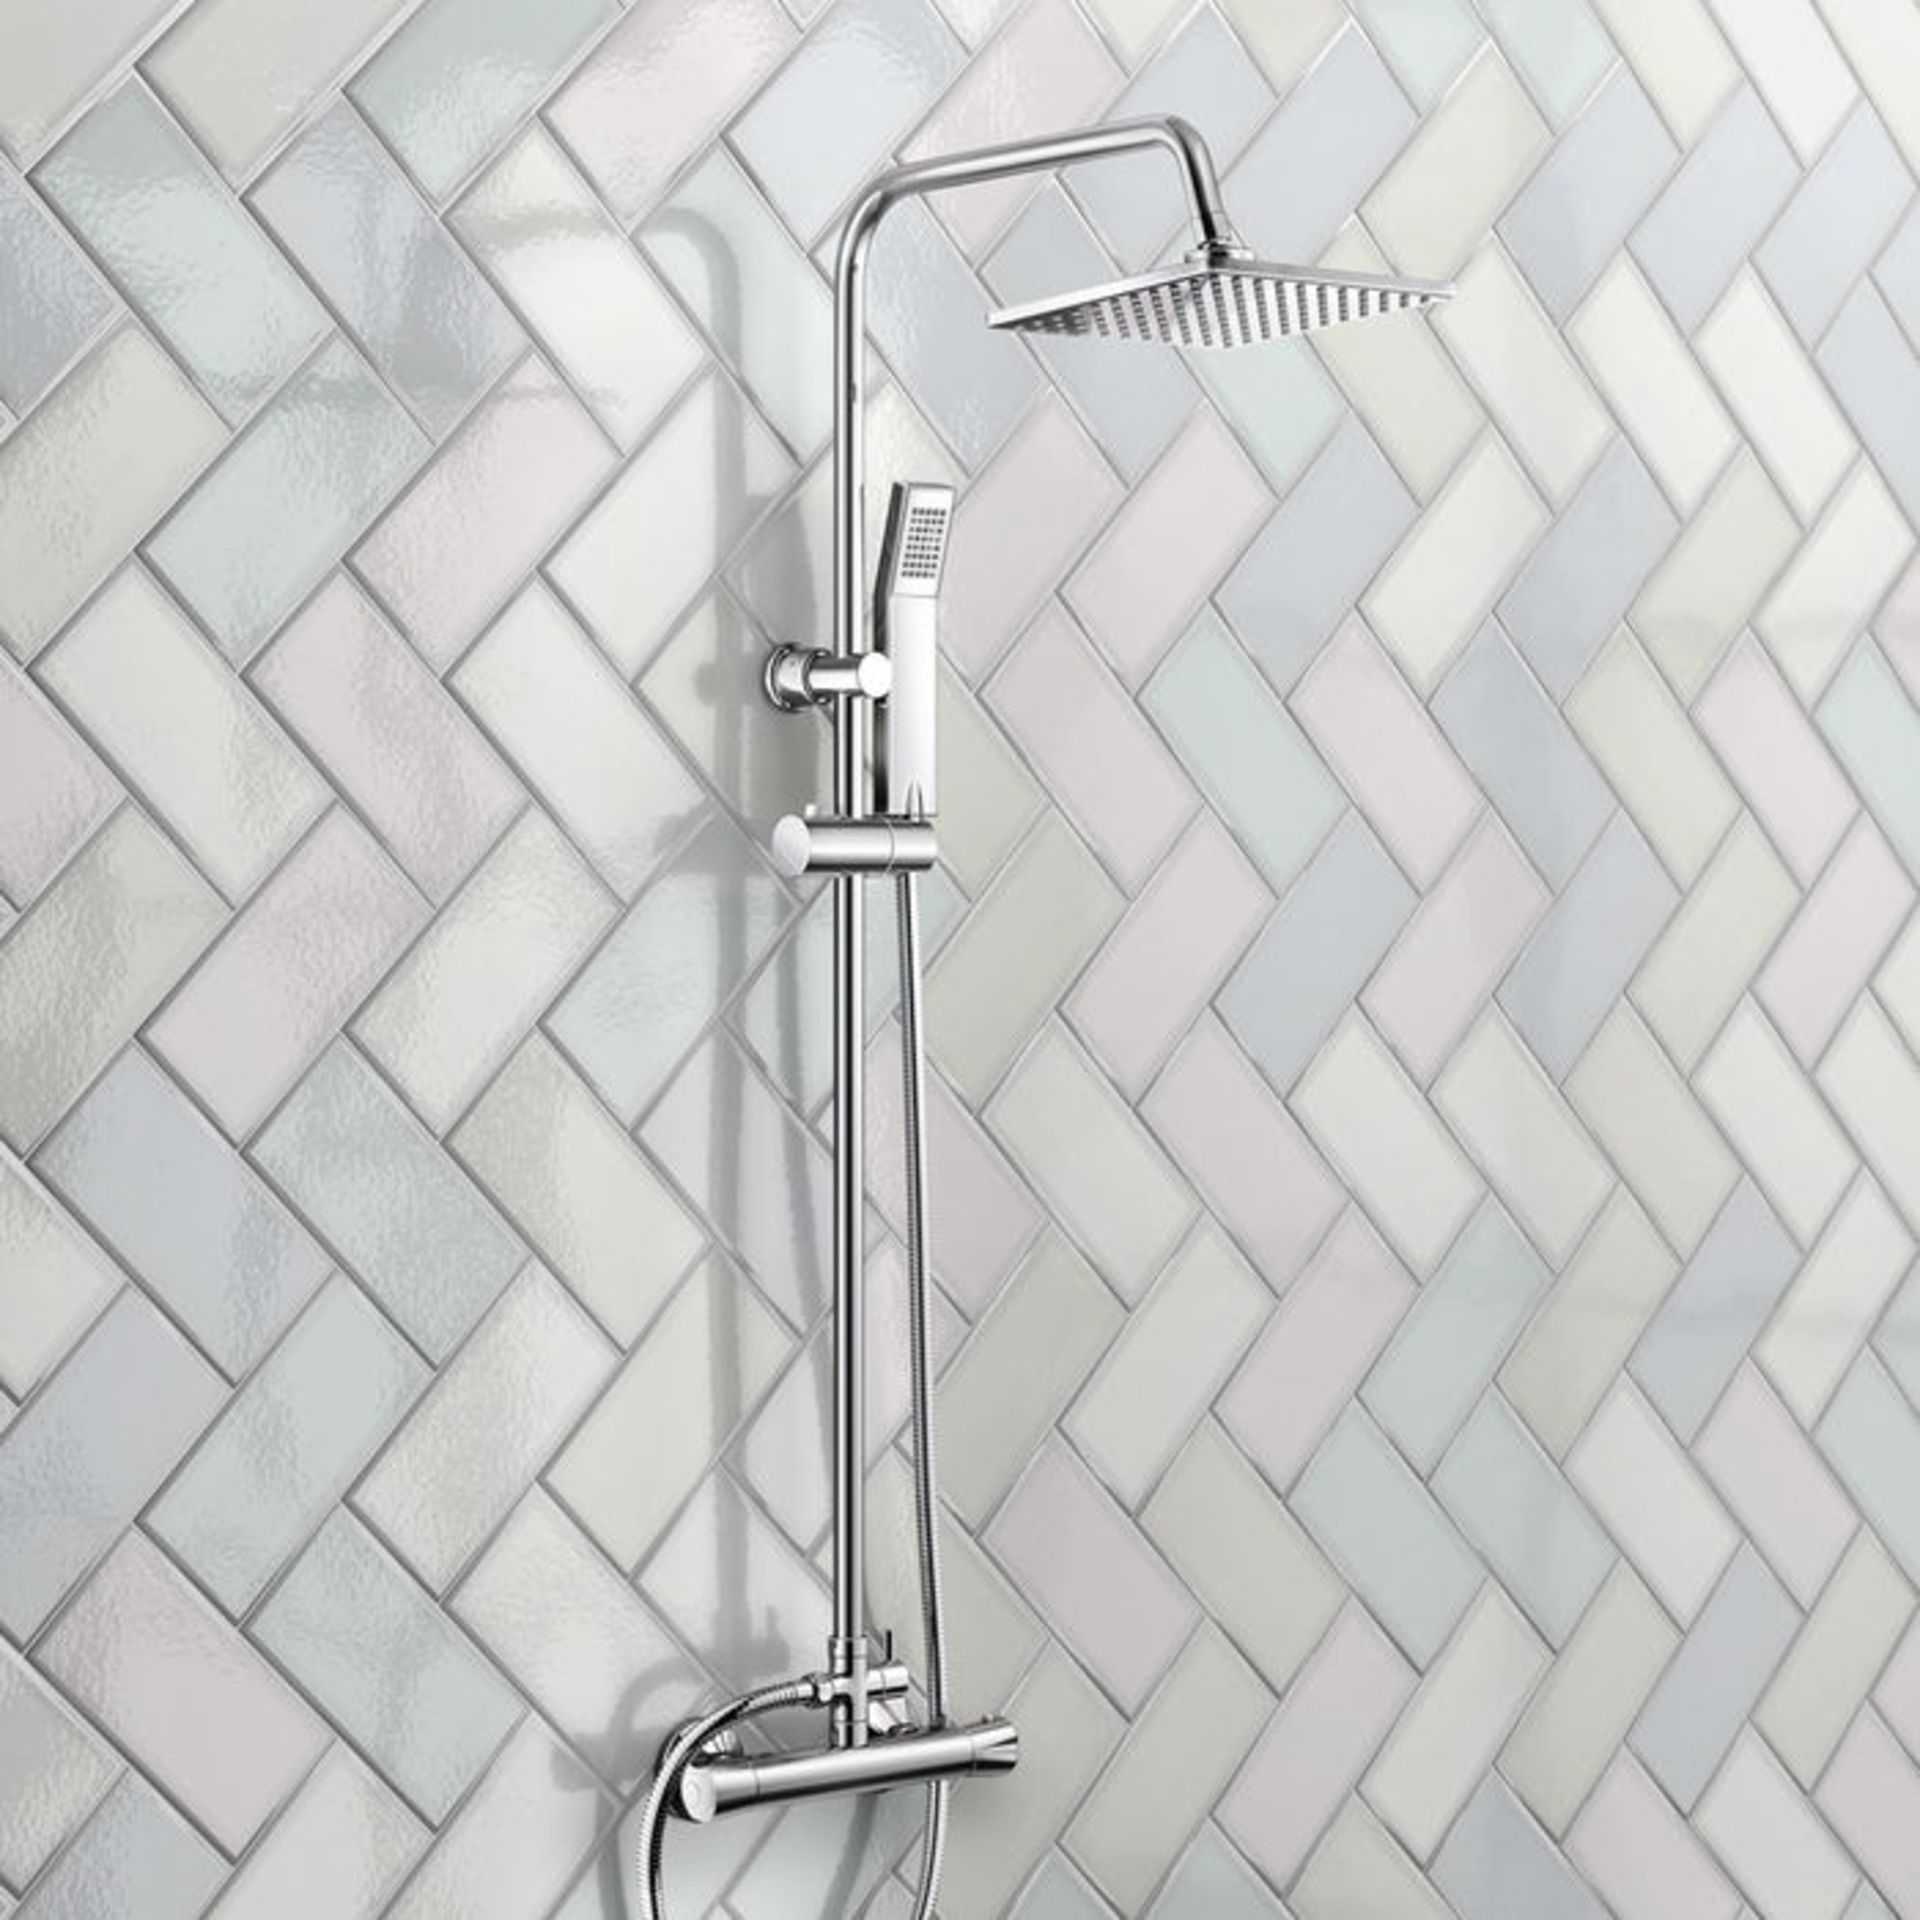 (NY97) Square Exposed Thermostatic Shower Kit & Medium Head. Curved features and contemporary - Image 3 of 3